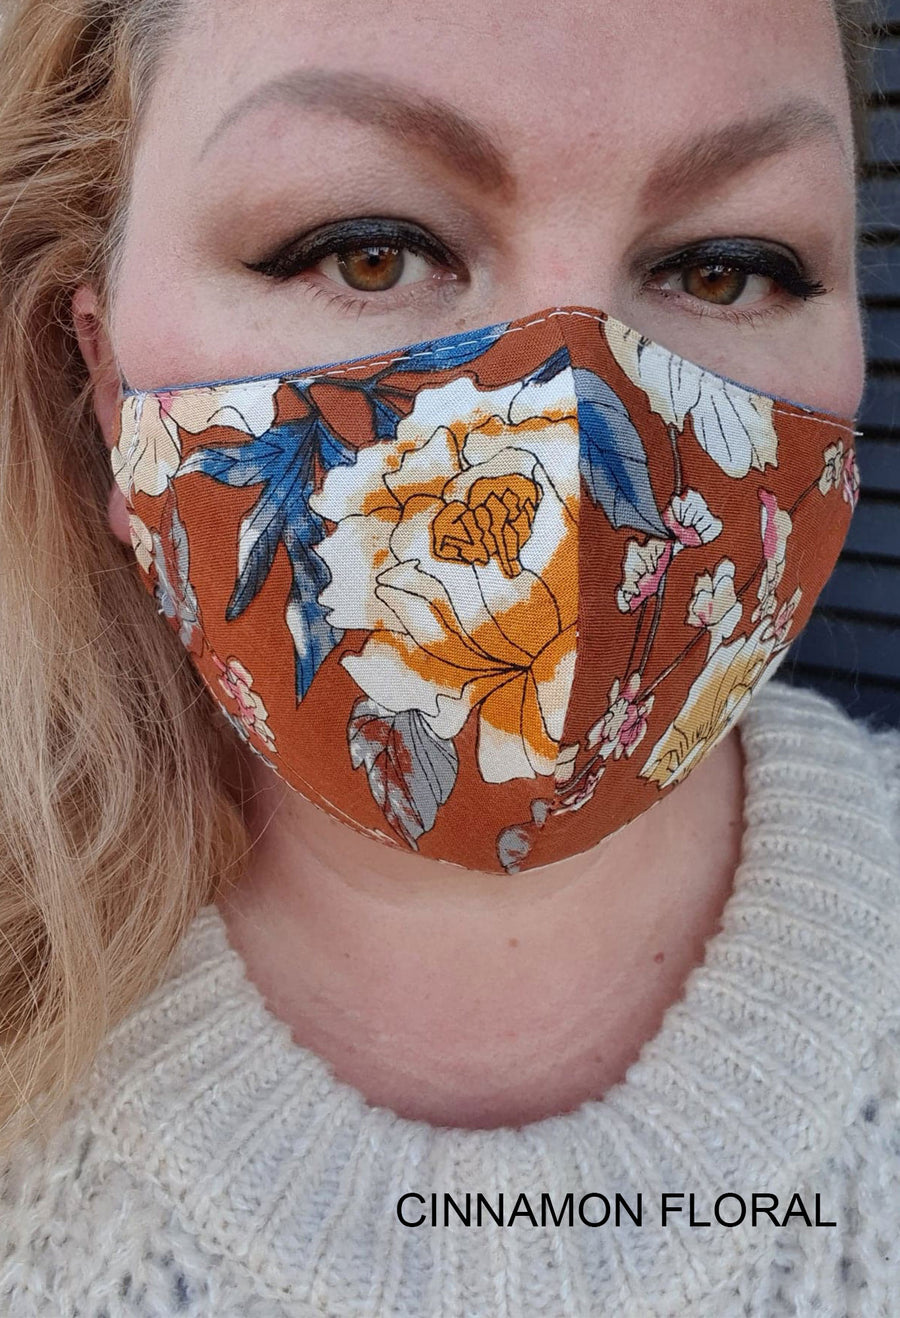 Face Mask - Buy 3 for $50- Custom Prints- Assorted Designs- Hand Made